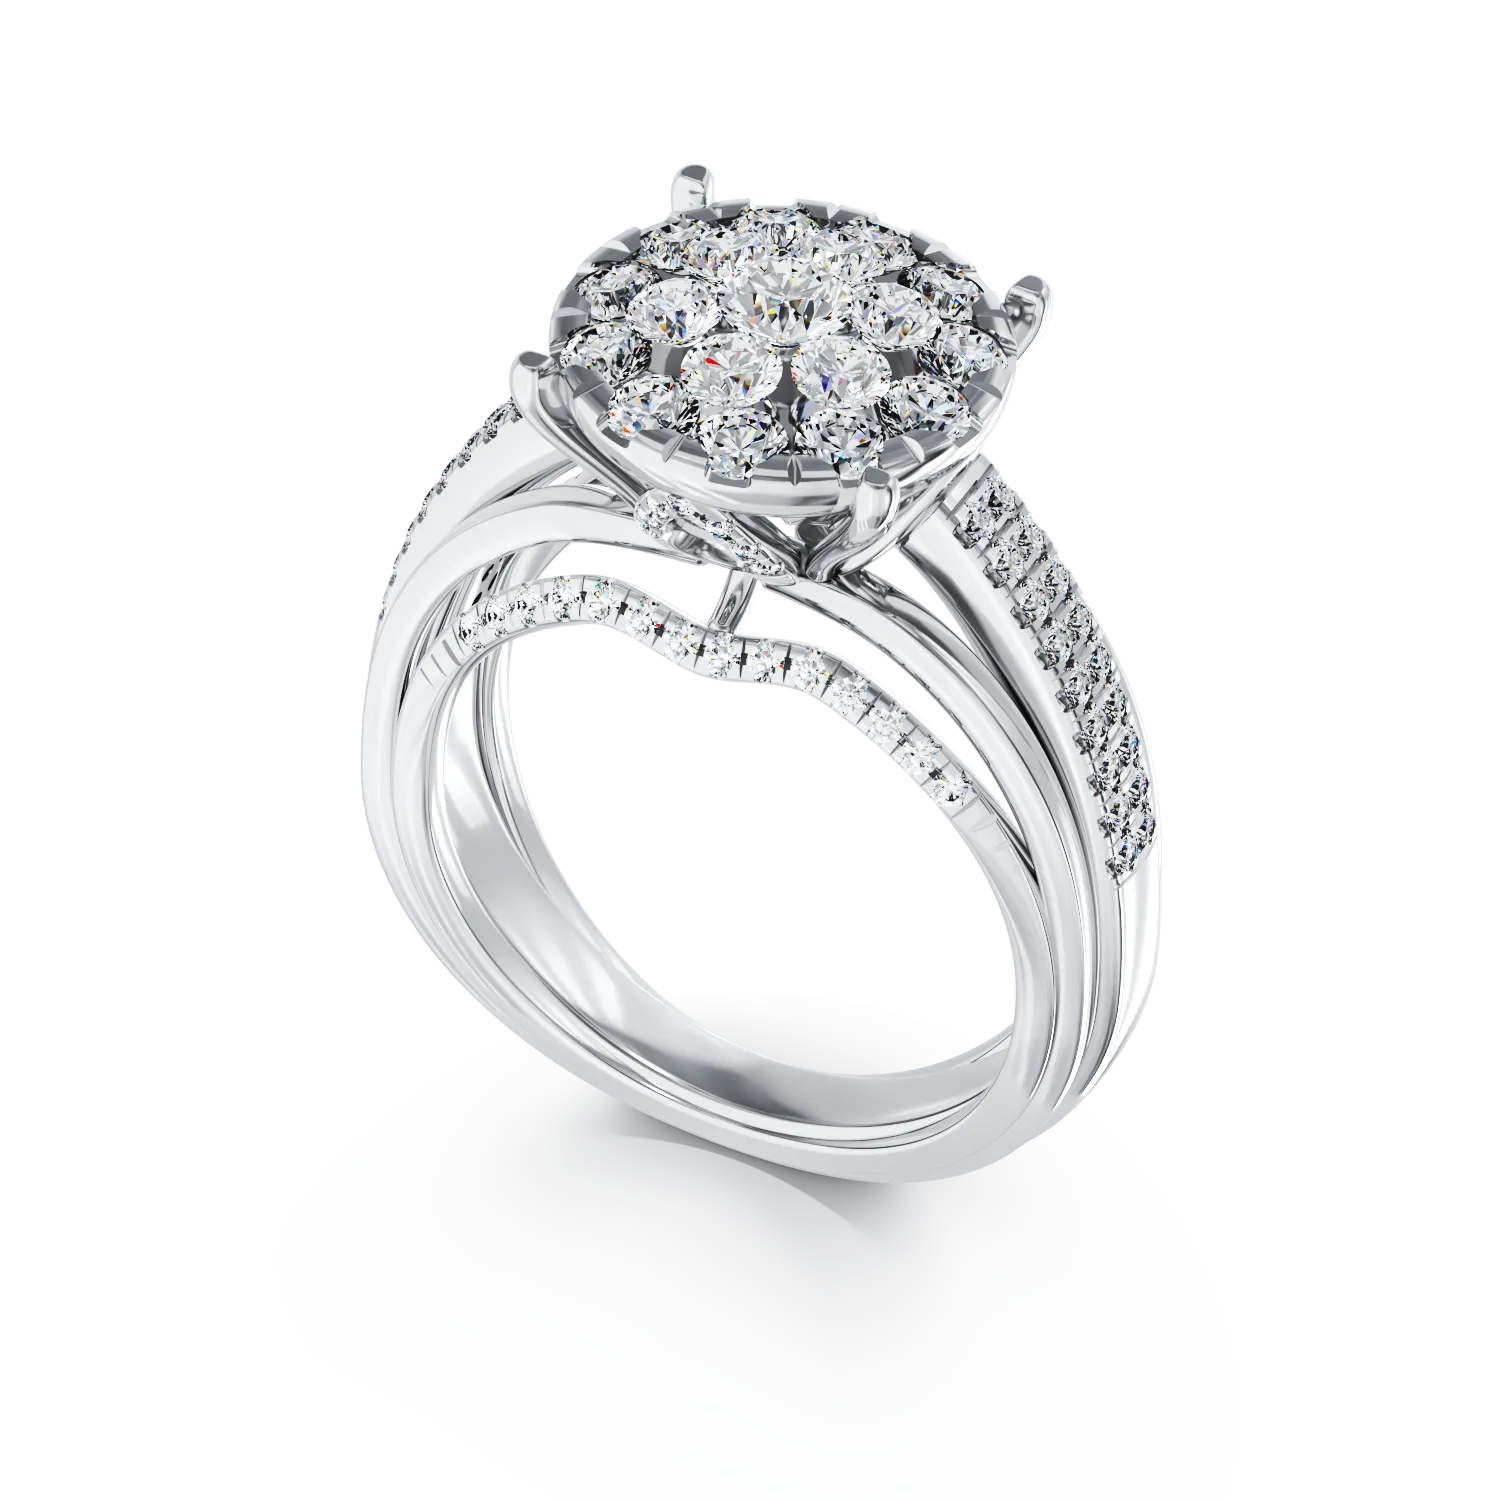 18K white gold engagement ring with diamonds of 0.91ct